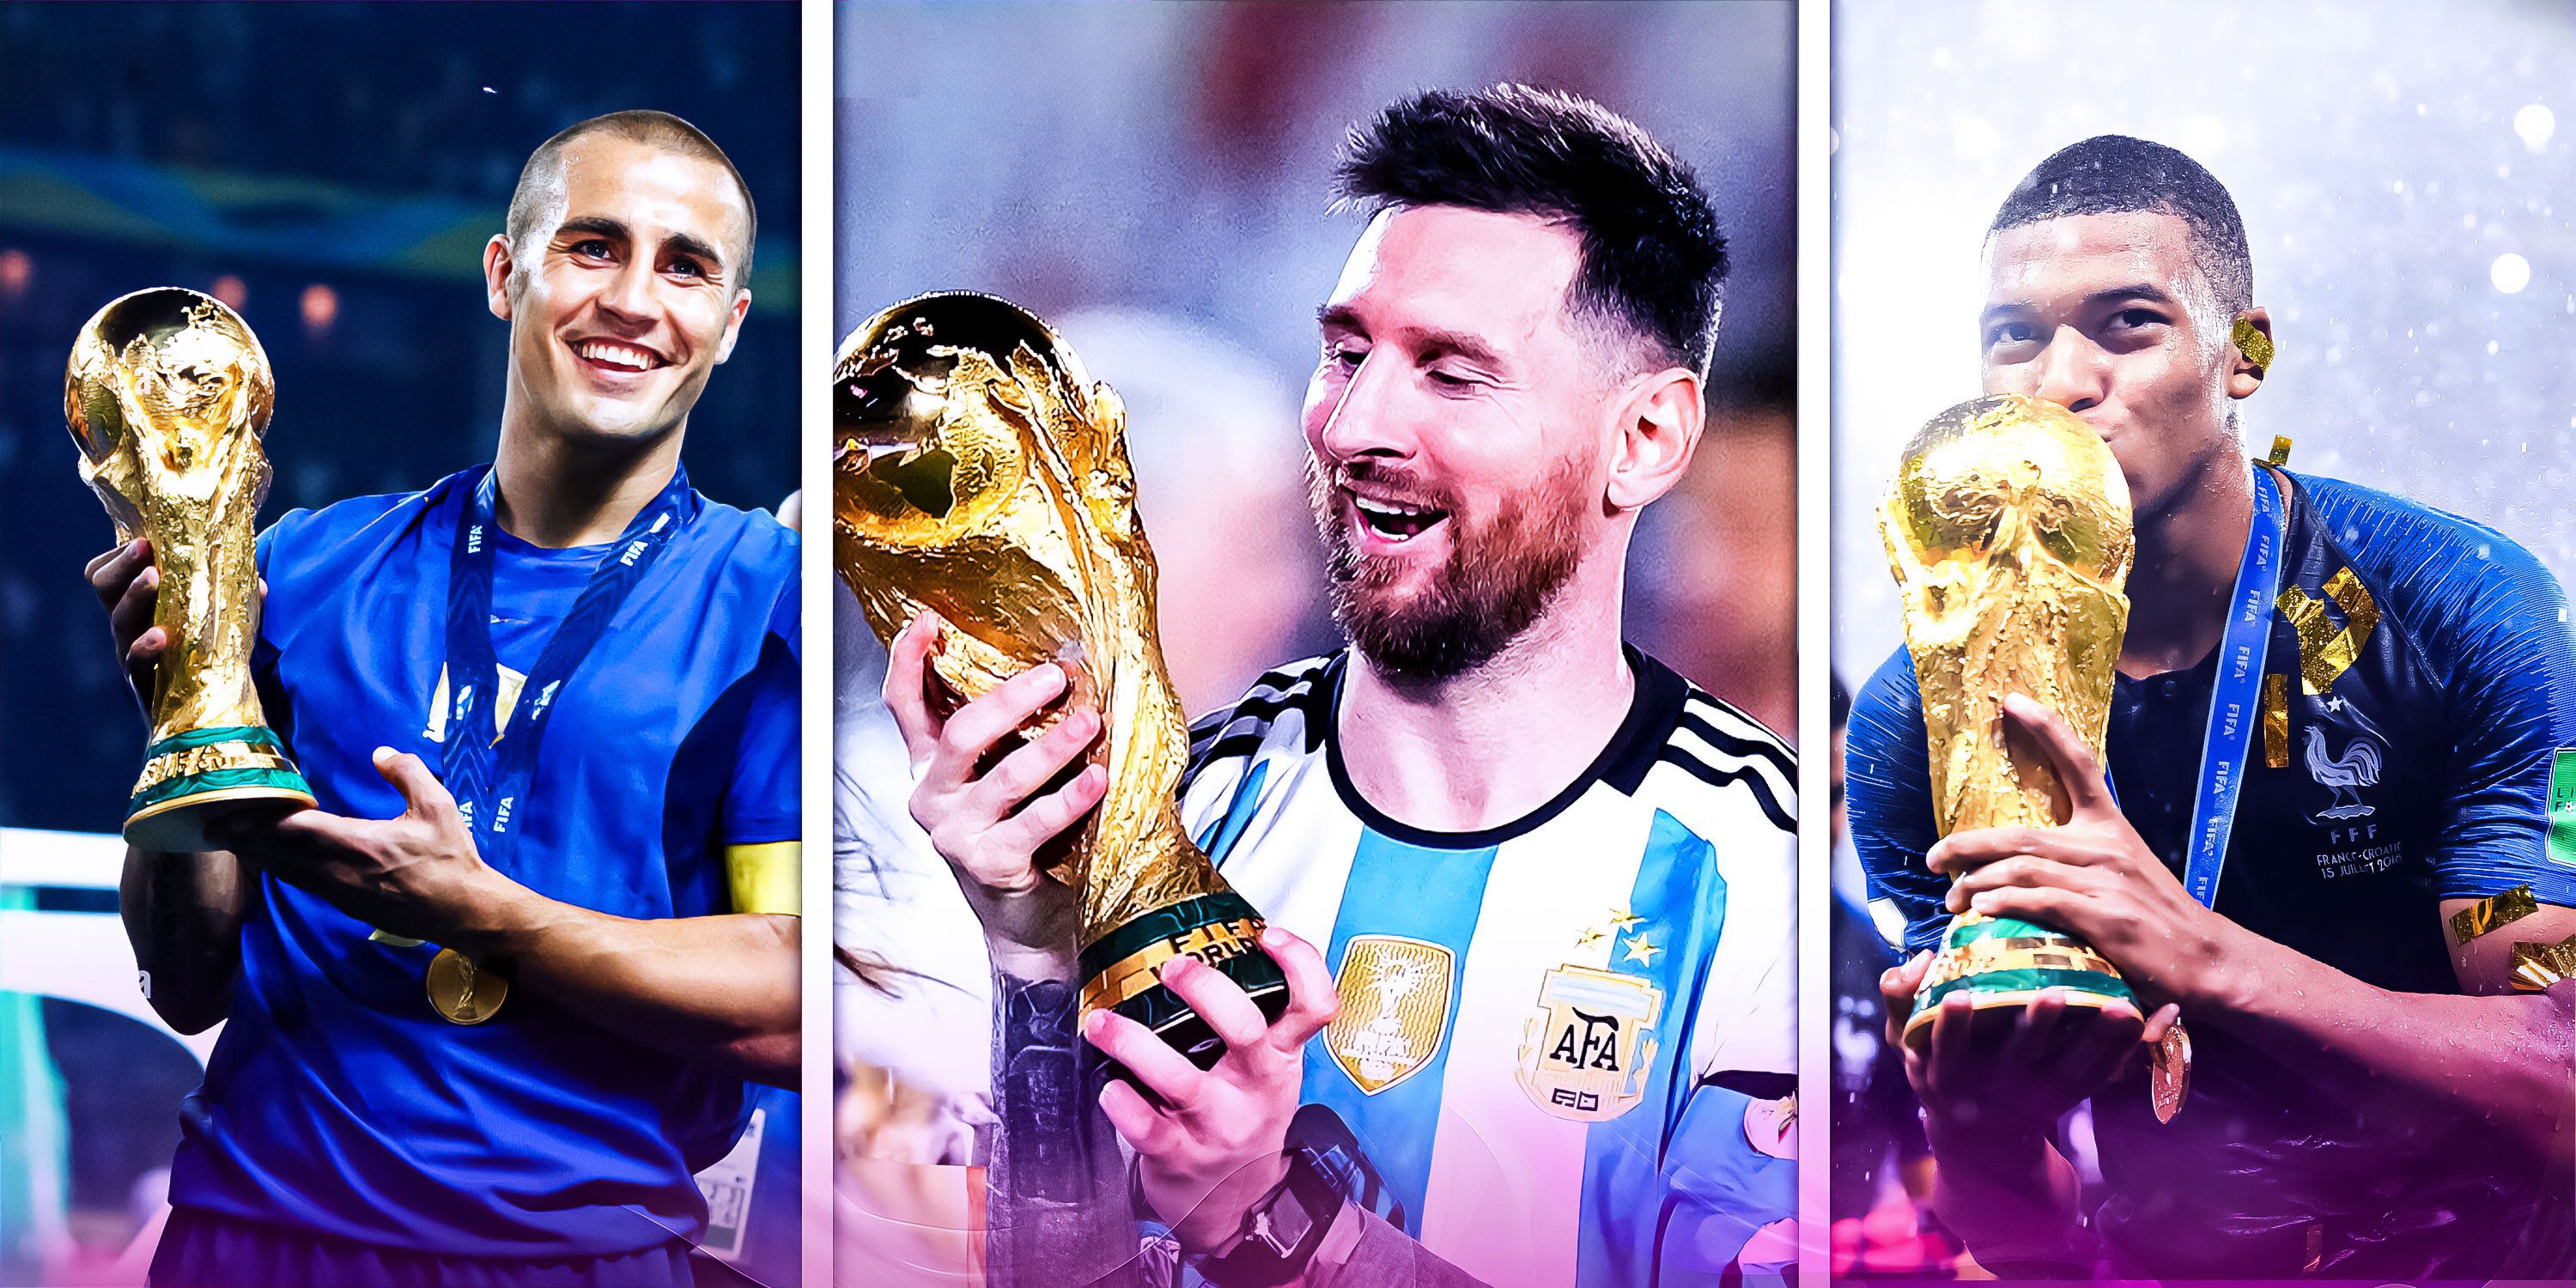 A composite image of Italy's Fabio Cannavaro, Argentina's Lionel Messi and France's Kylian Mbappe celebrating with the World Cup trophy